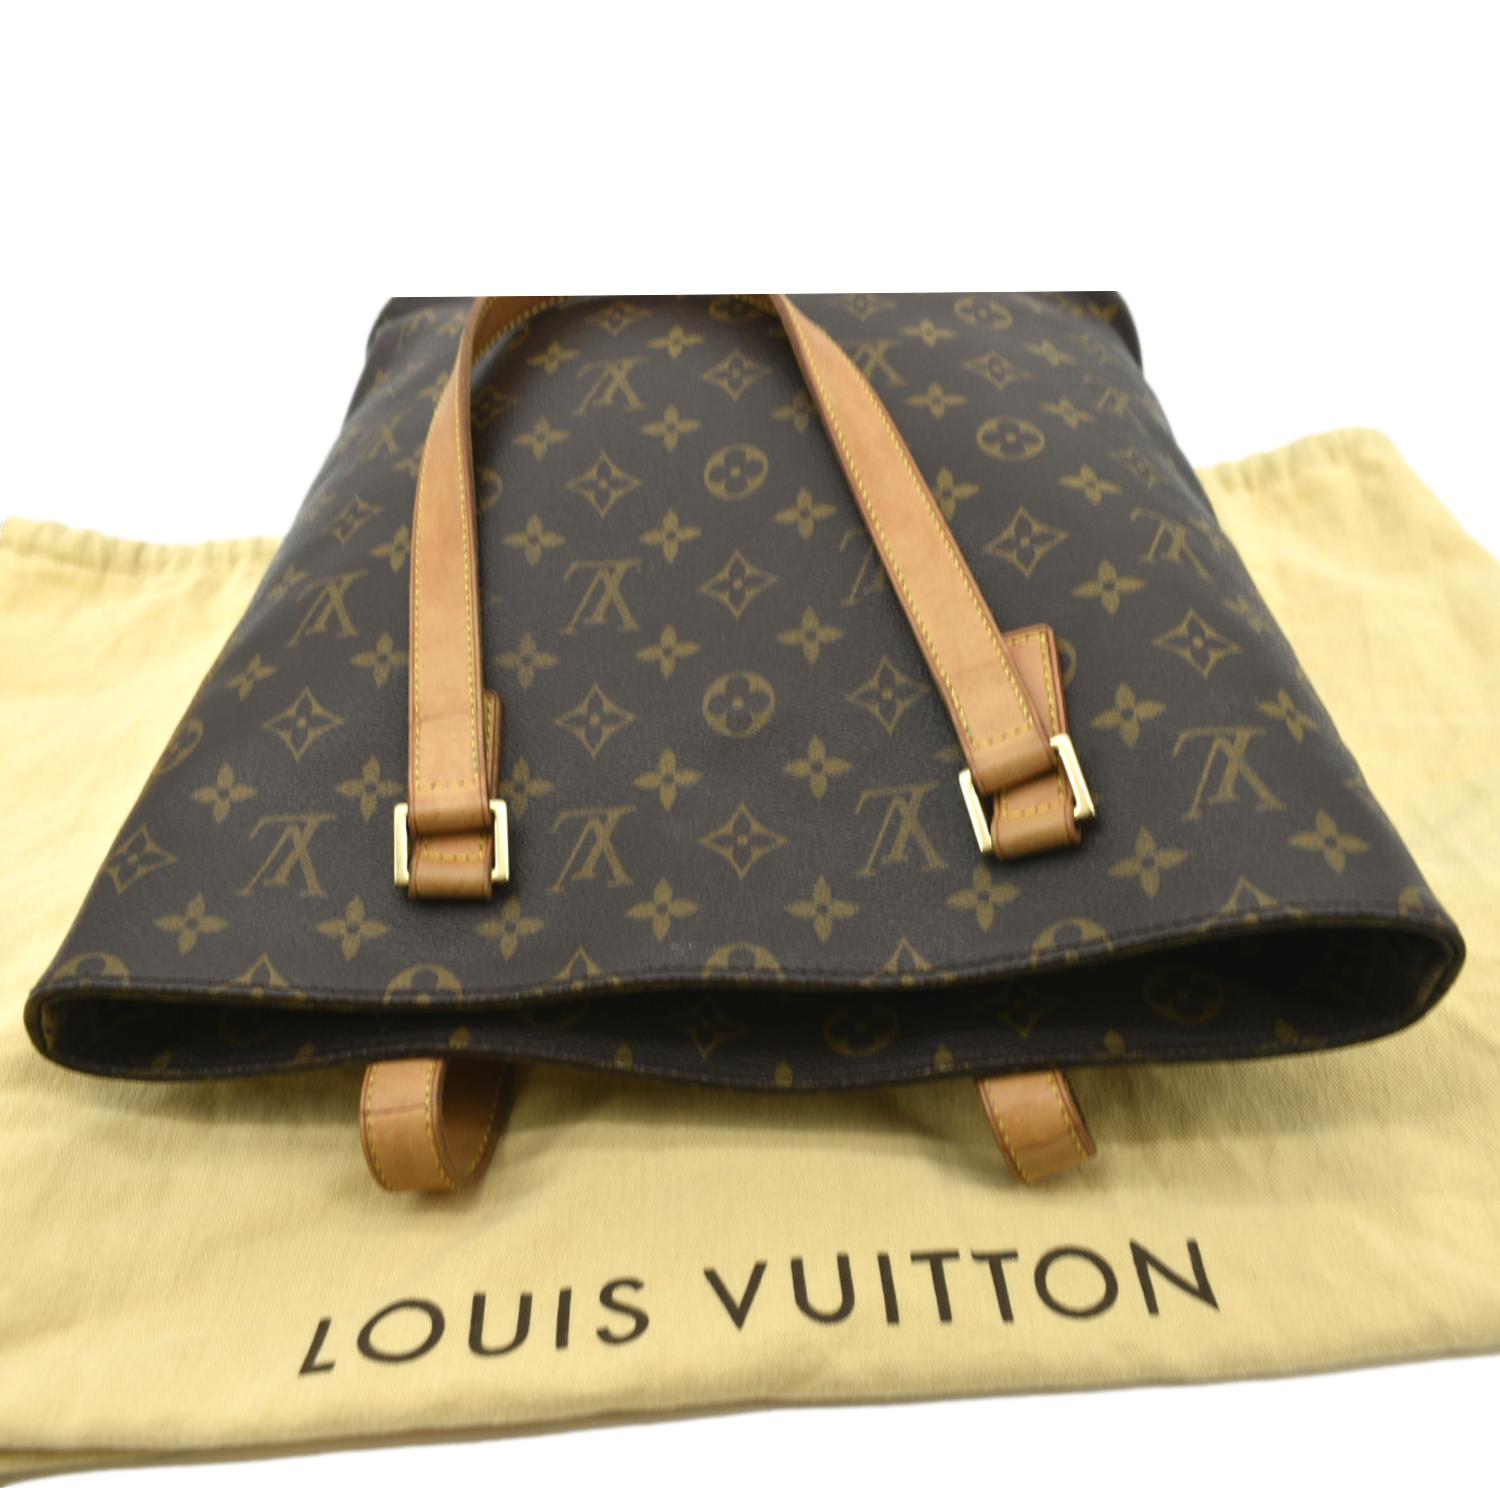 Louis Vuitton Vavin Gm Canvas Tote Bag (pre-owned) in Brown